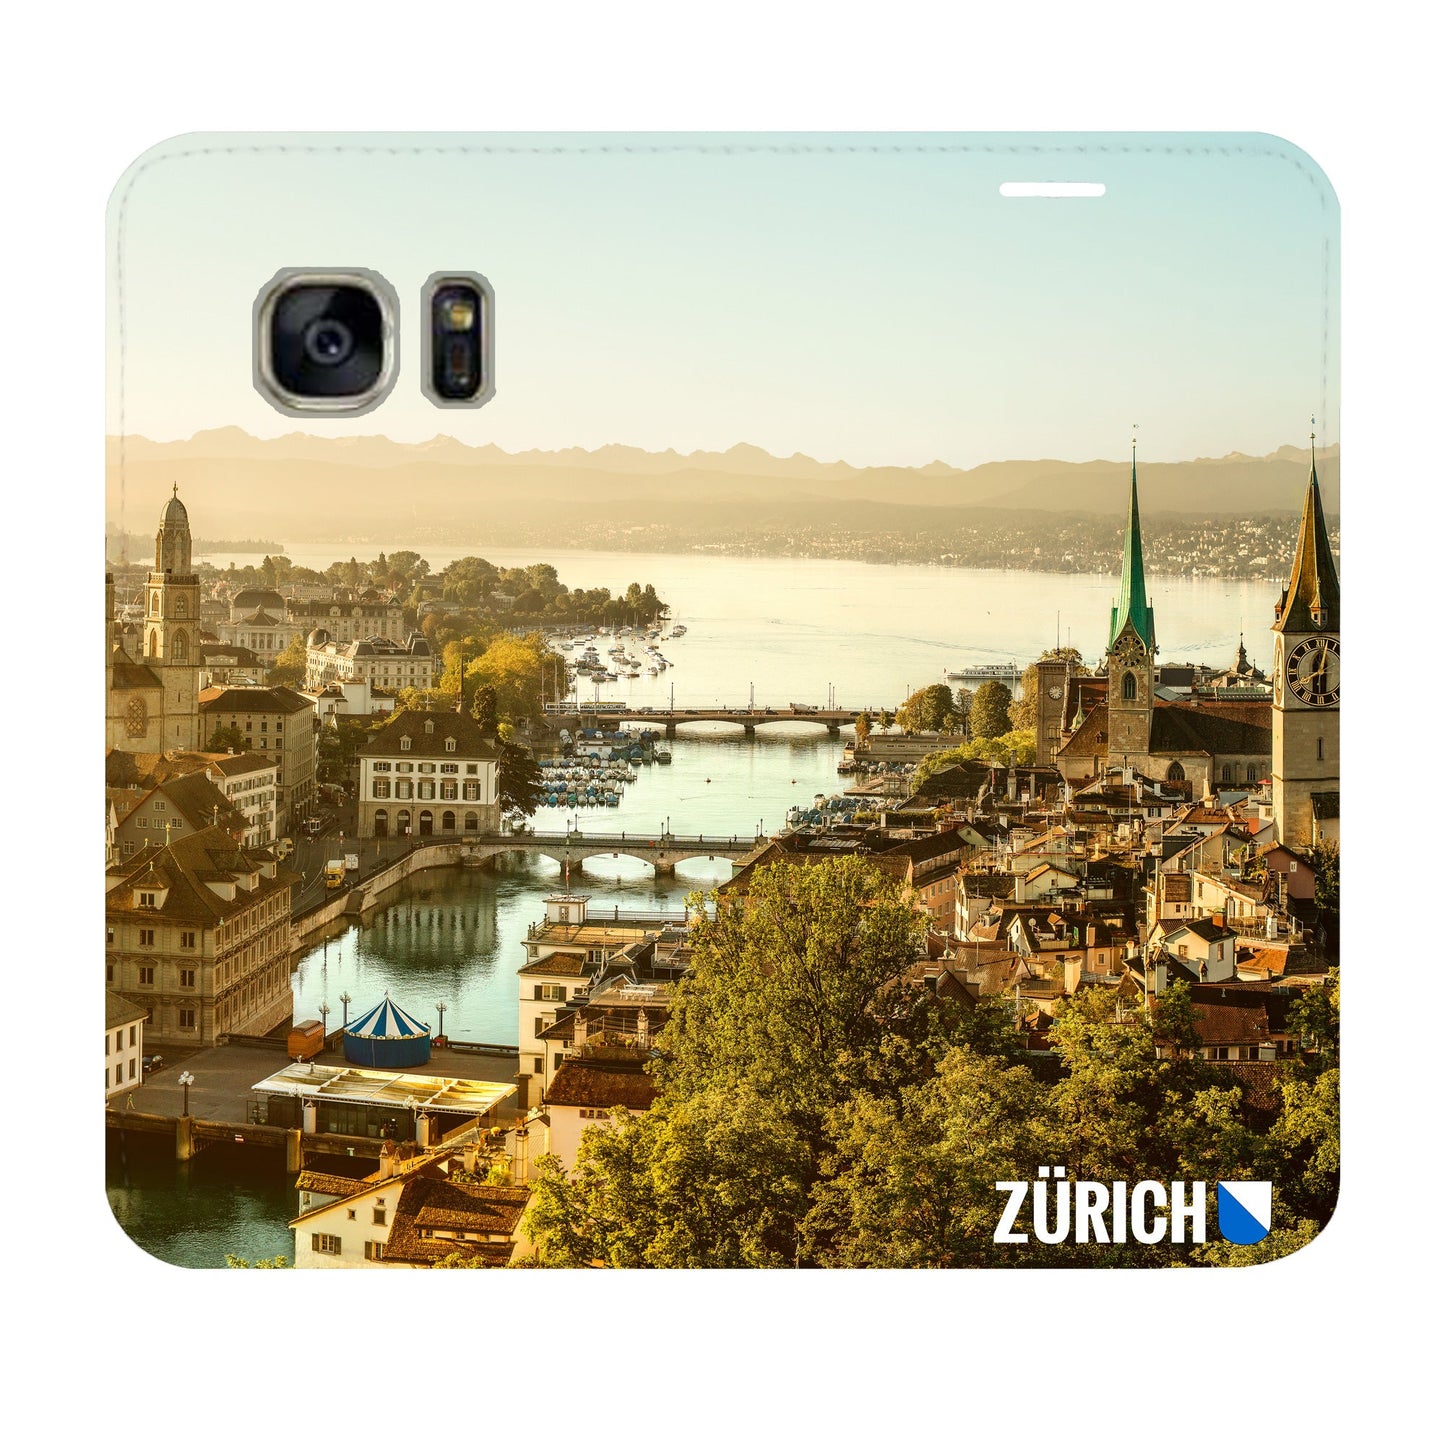 Zurich City from Above Panorama for Samsung Galaxy S7 Edge